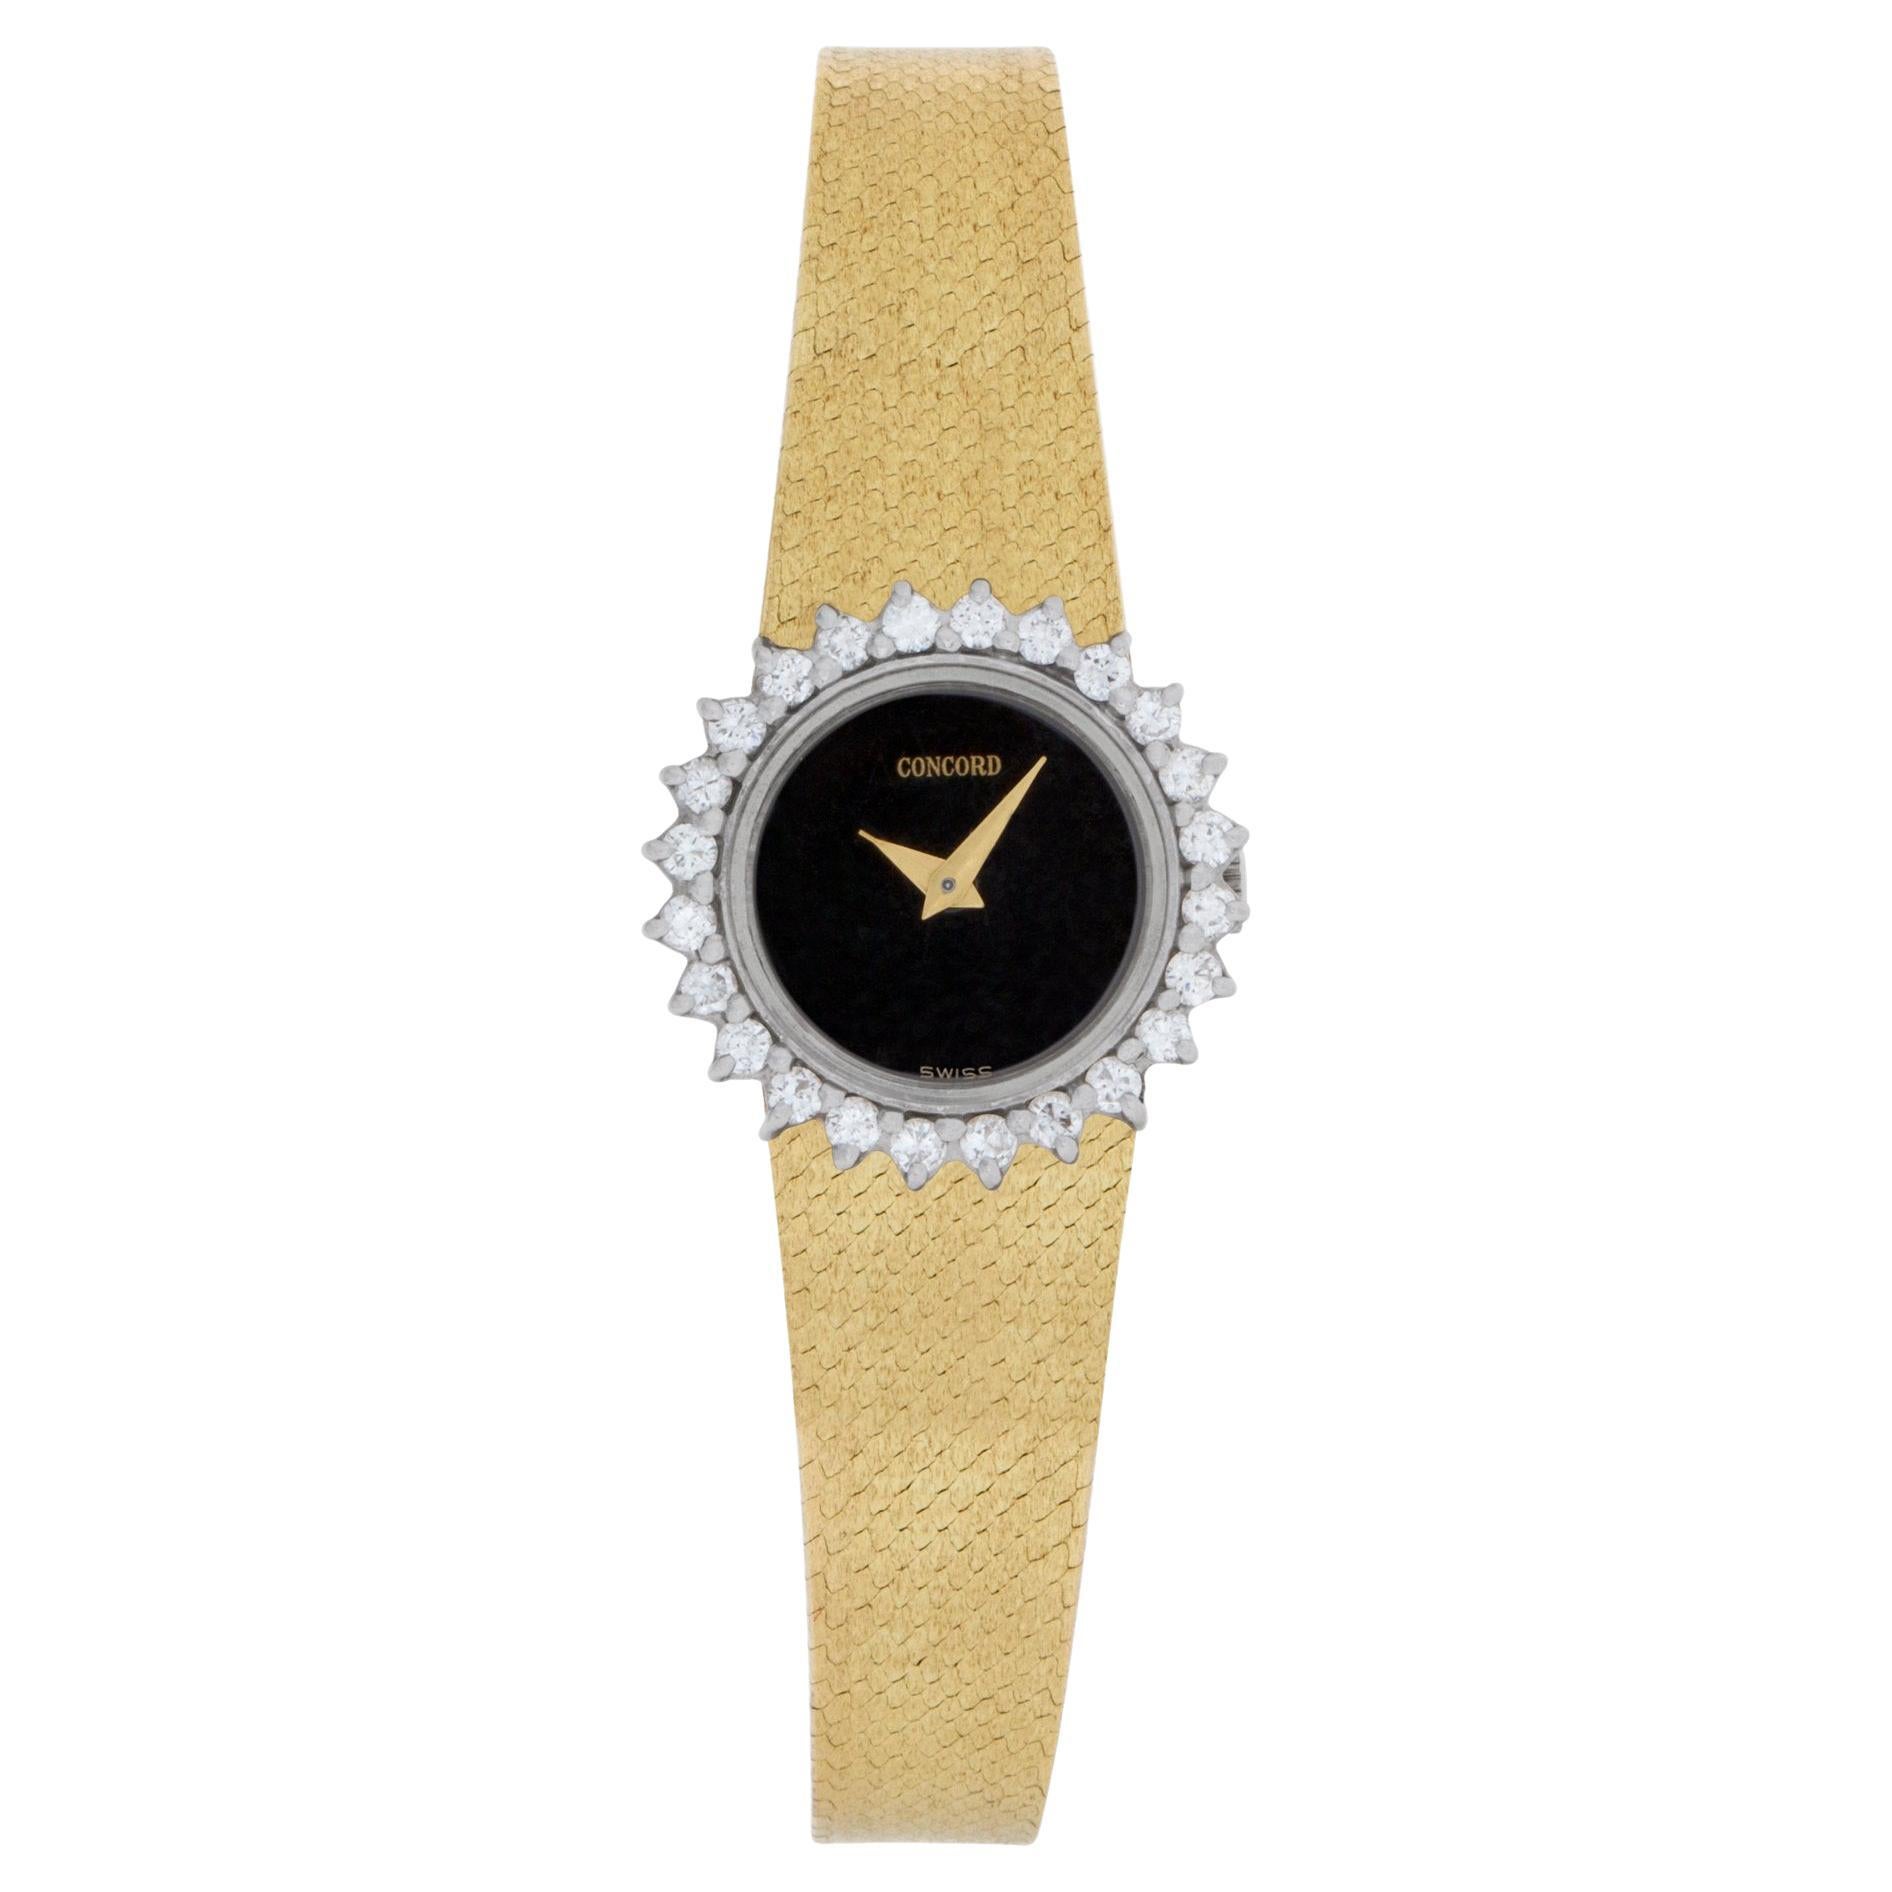 Concord Classic Watch in 14k Yellow Gold with Approximately 0.70 Carats in